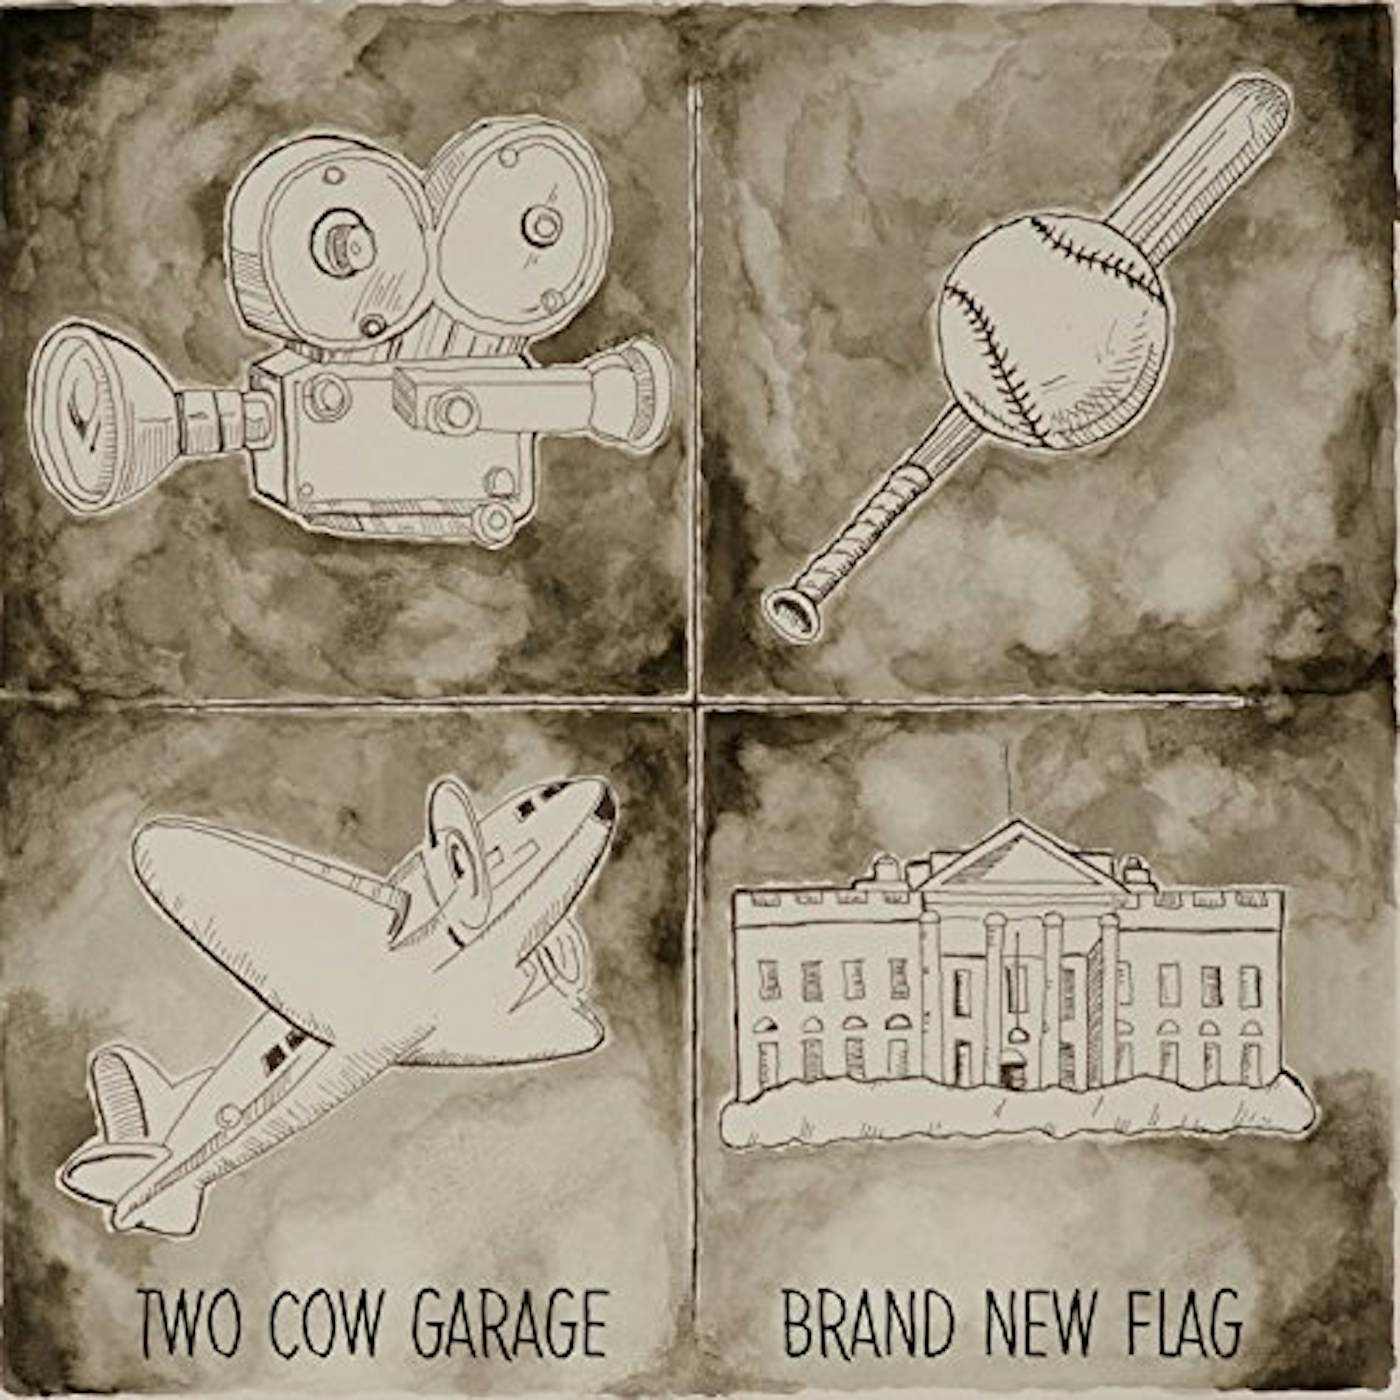 Two Cow Garage Brand New Flag Vinyl Record